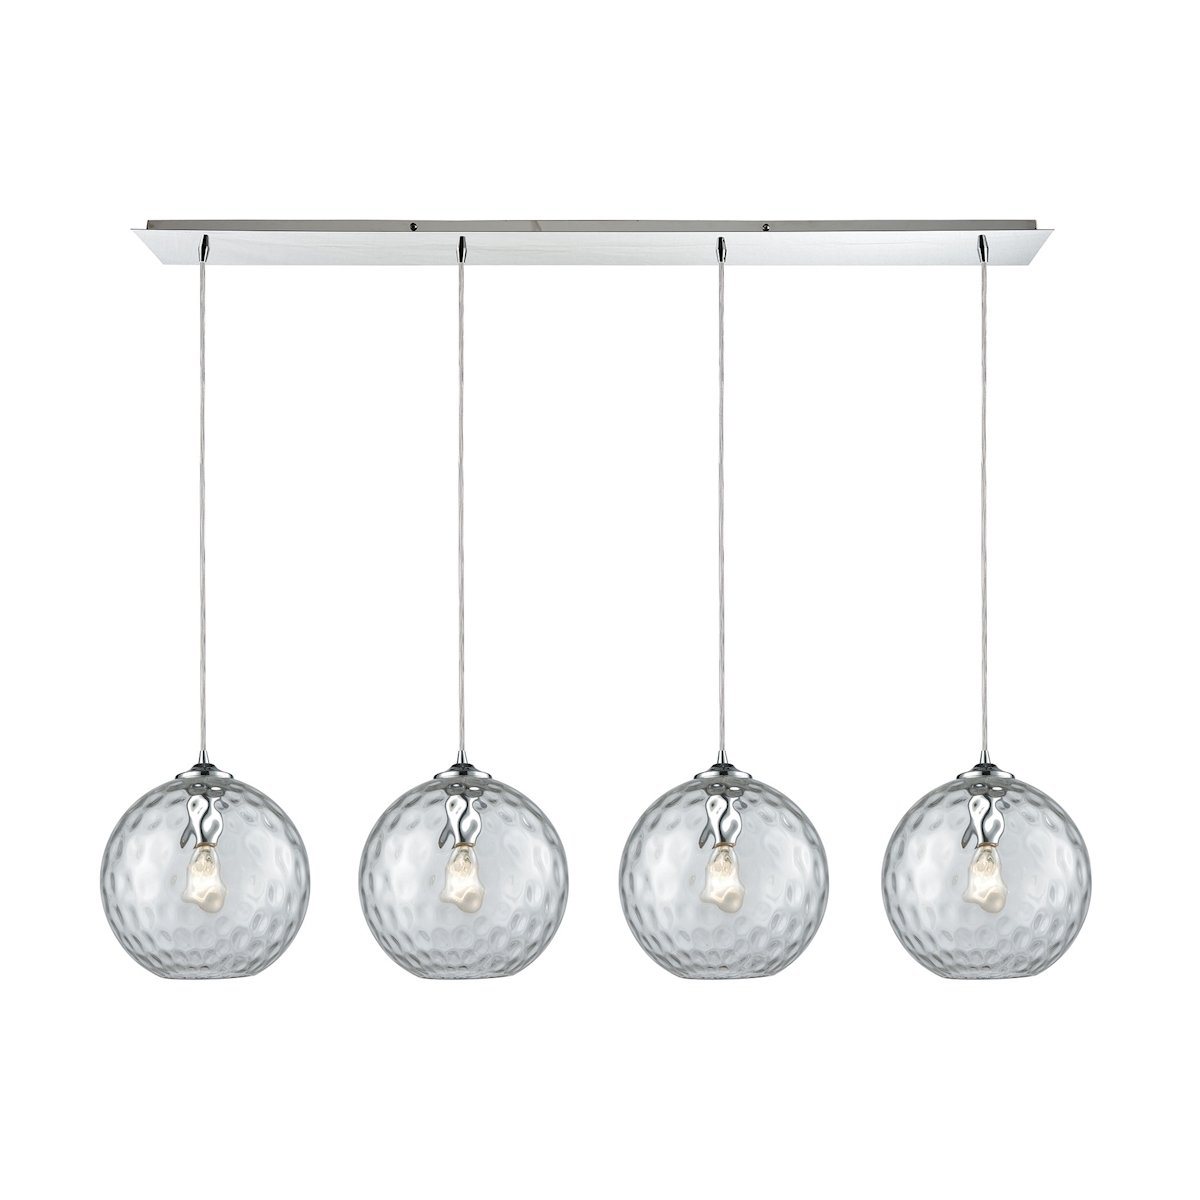 Watersphere 4 Light Linear Pan Fixture In Polished Chrome With Clear Hammered Glass Ceiling Elk Lighting 